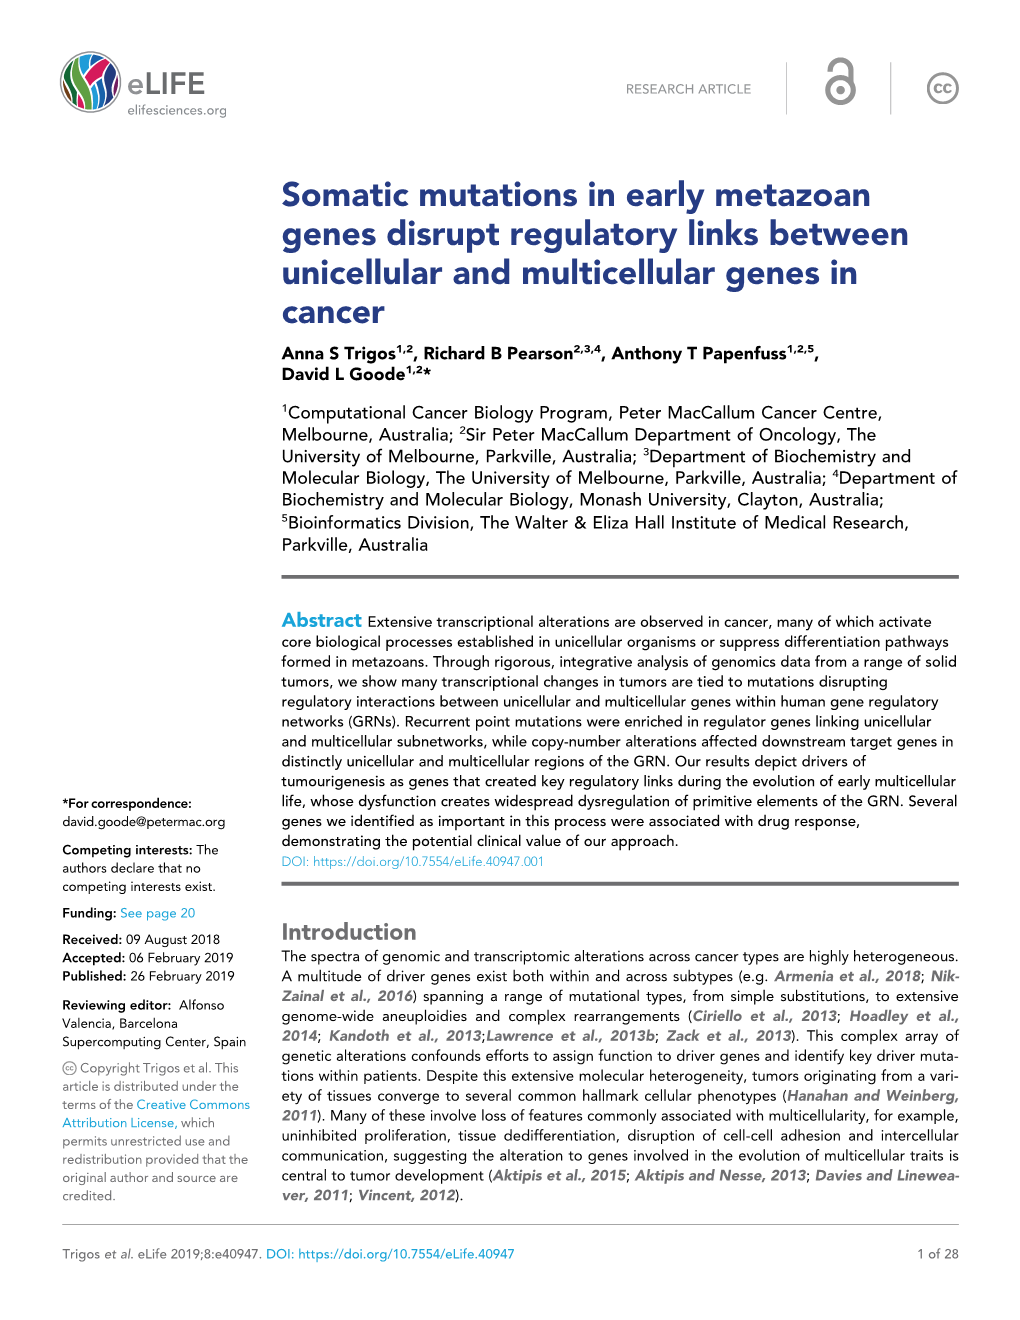 Somatic Mutations in Early Metazoan Genes Disrupt Regulatory Links Between Unicellular and Multicellular Genes in Cancer